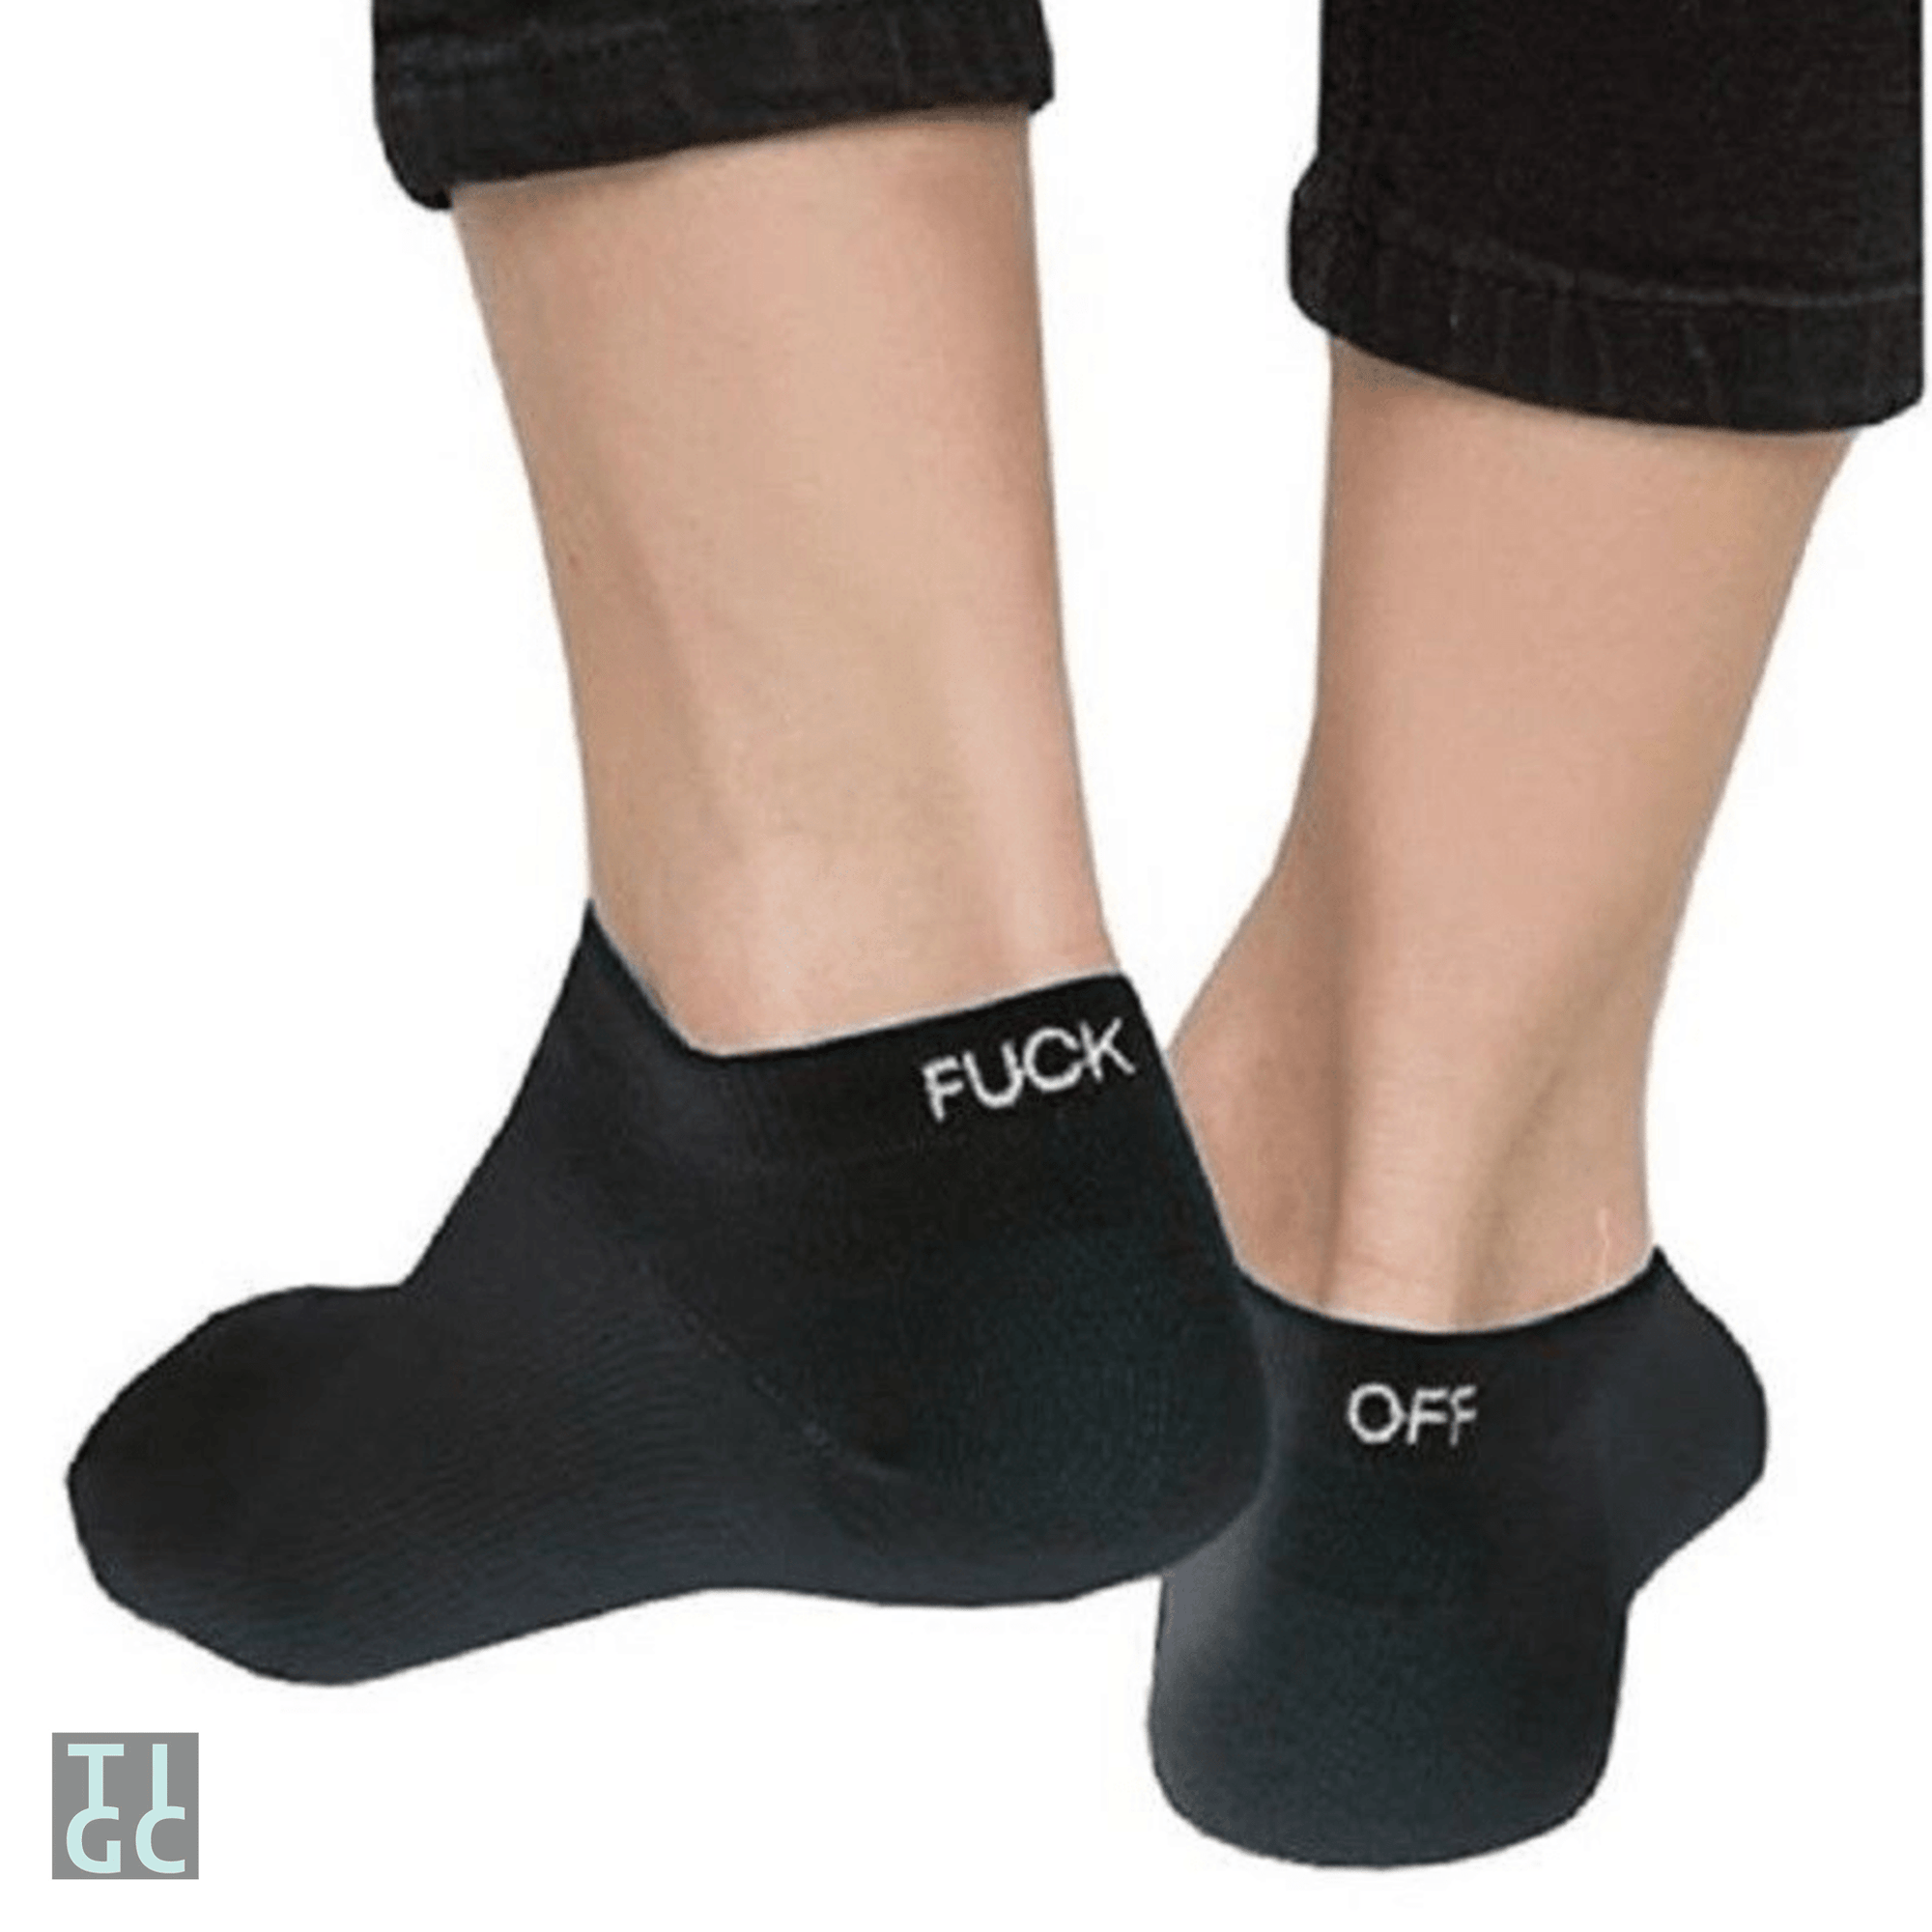 TIGC The Inappropriate Gift Co Fuck Off Ankle Socks